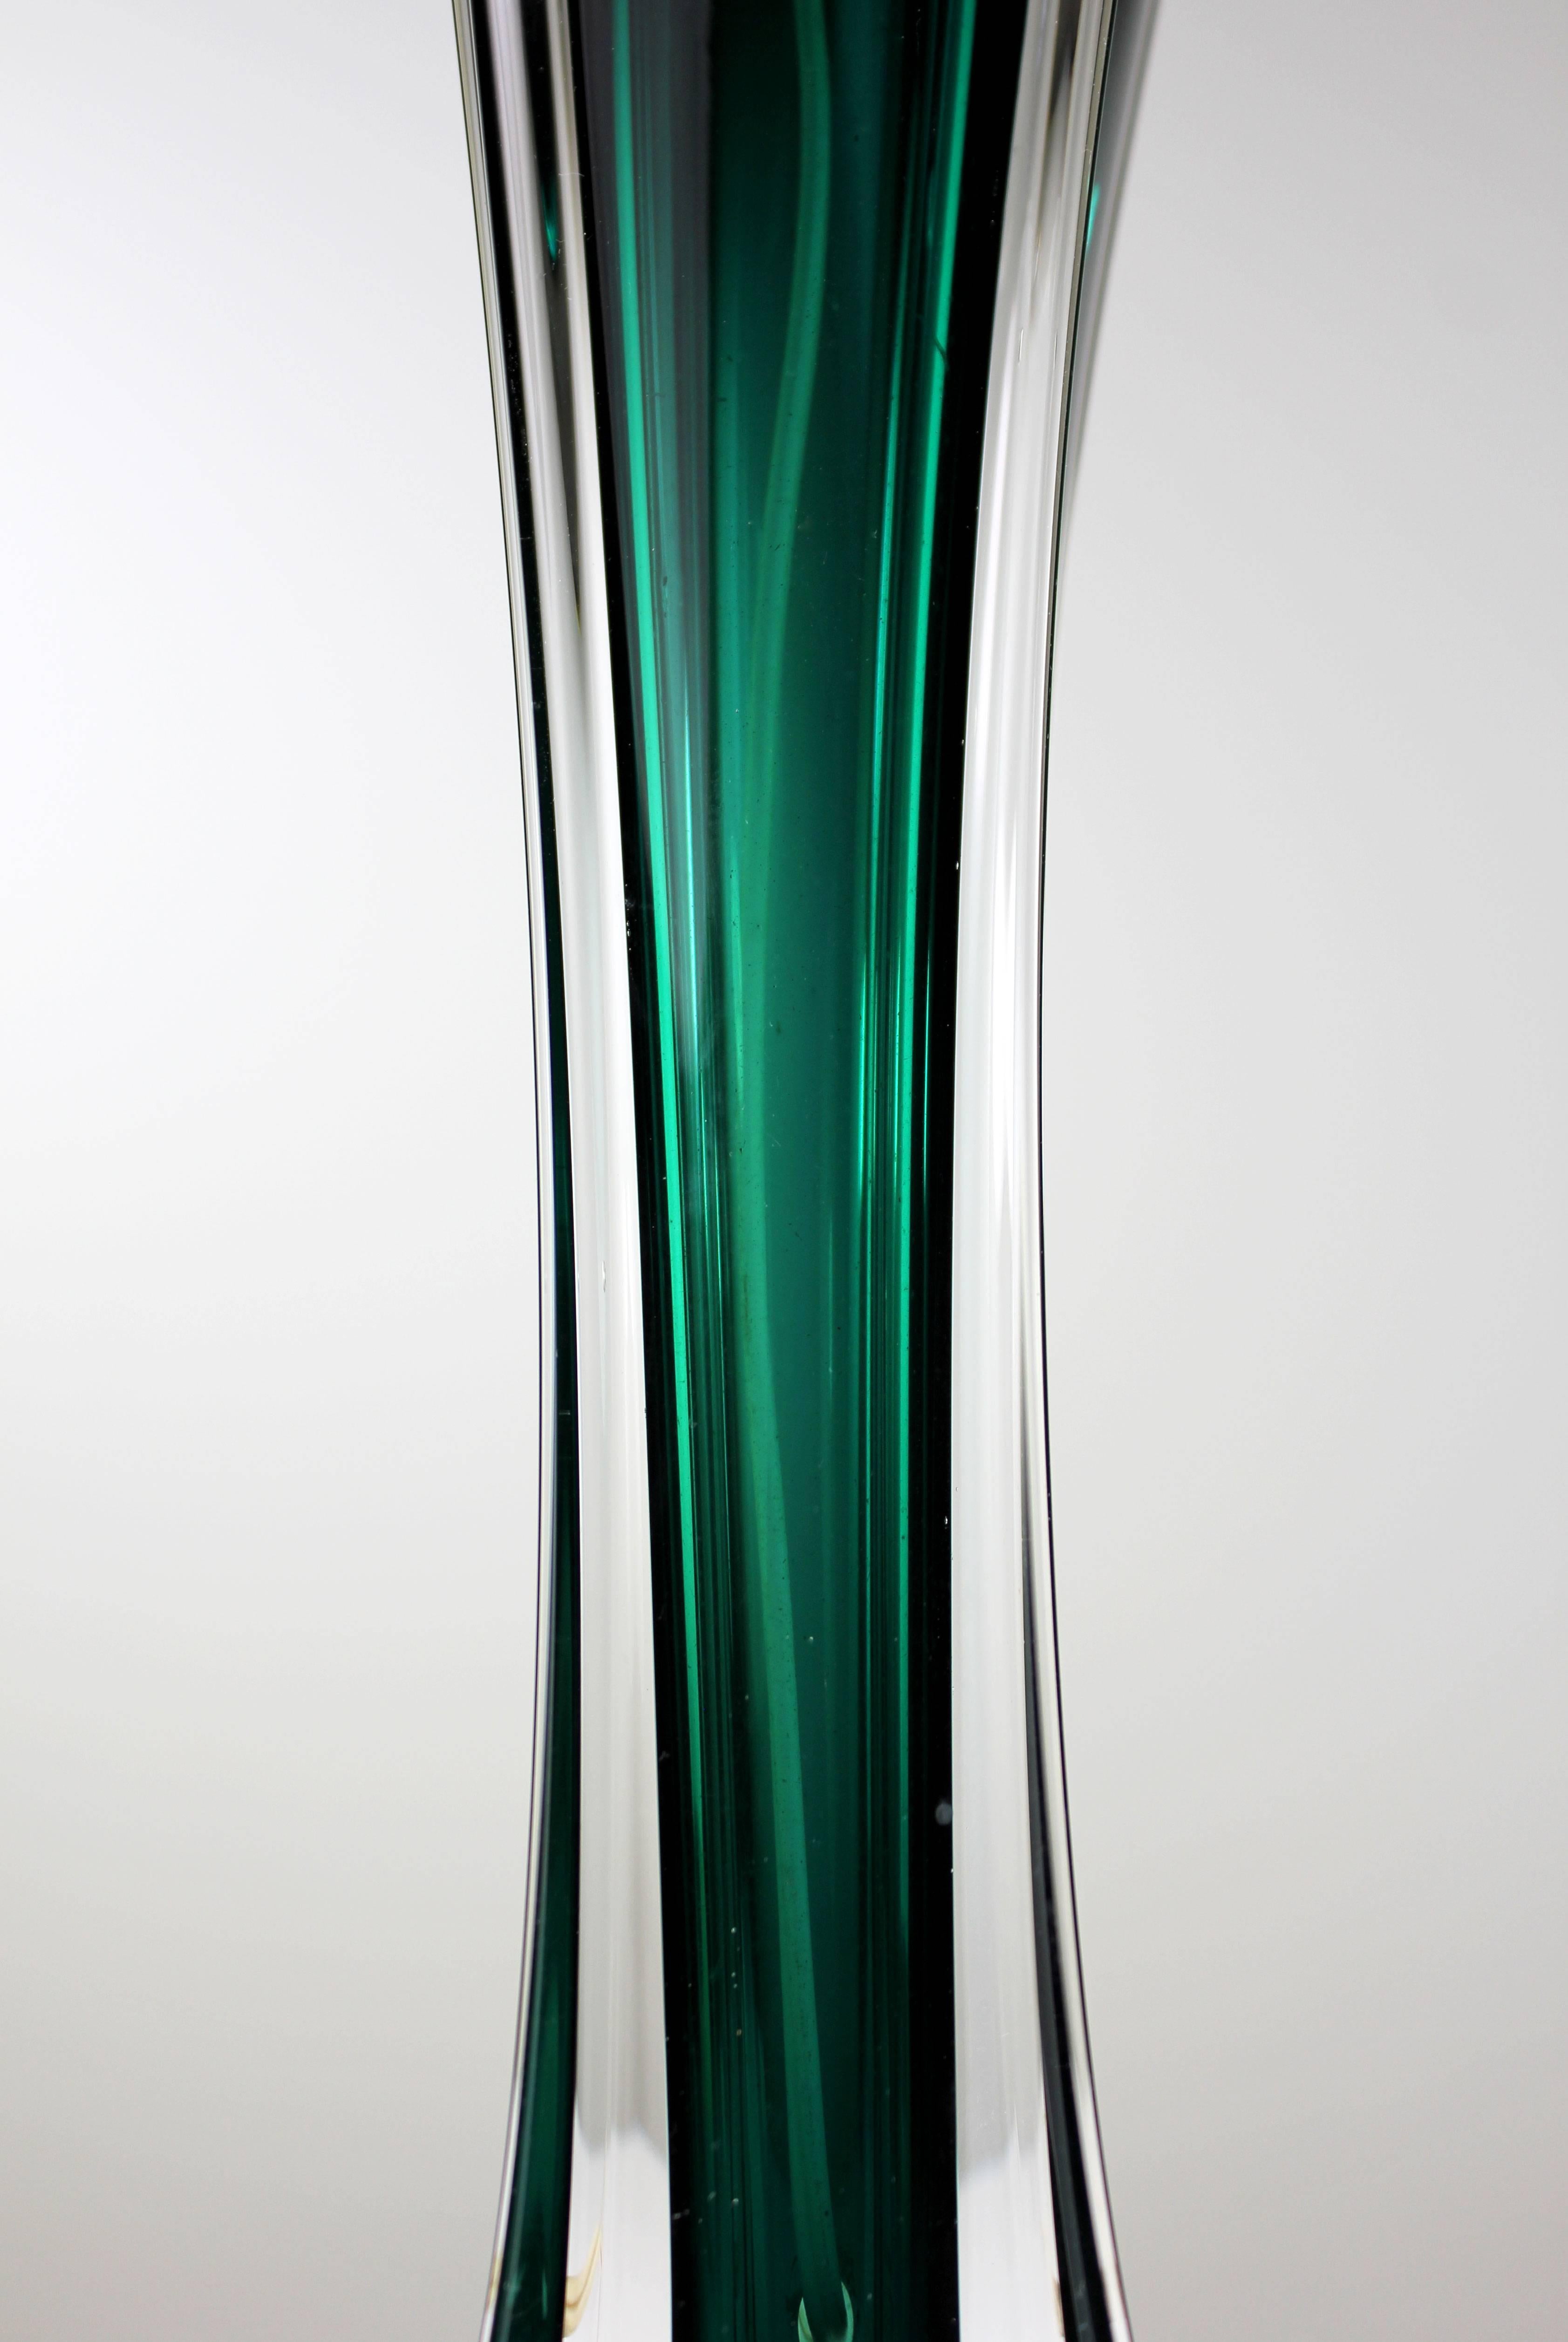 Majestic Swedish midentury modern Sommerso table lamp. Designed by Flygsfors' chief designer in the early 1950s, Paul Kedelv. Hour glass shaped deep forest green crystal encased in clear crystal with square base. Switch on original fitting for E27